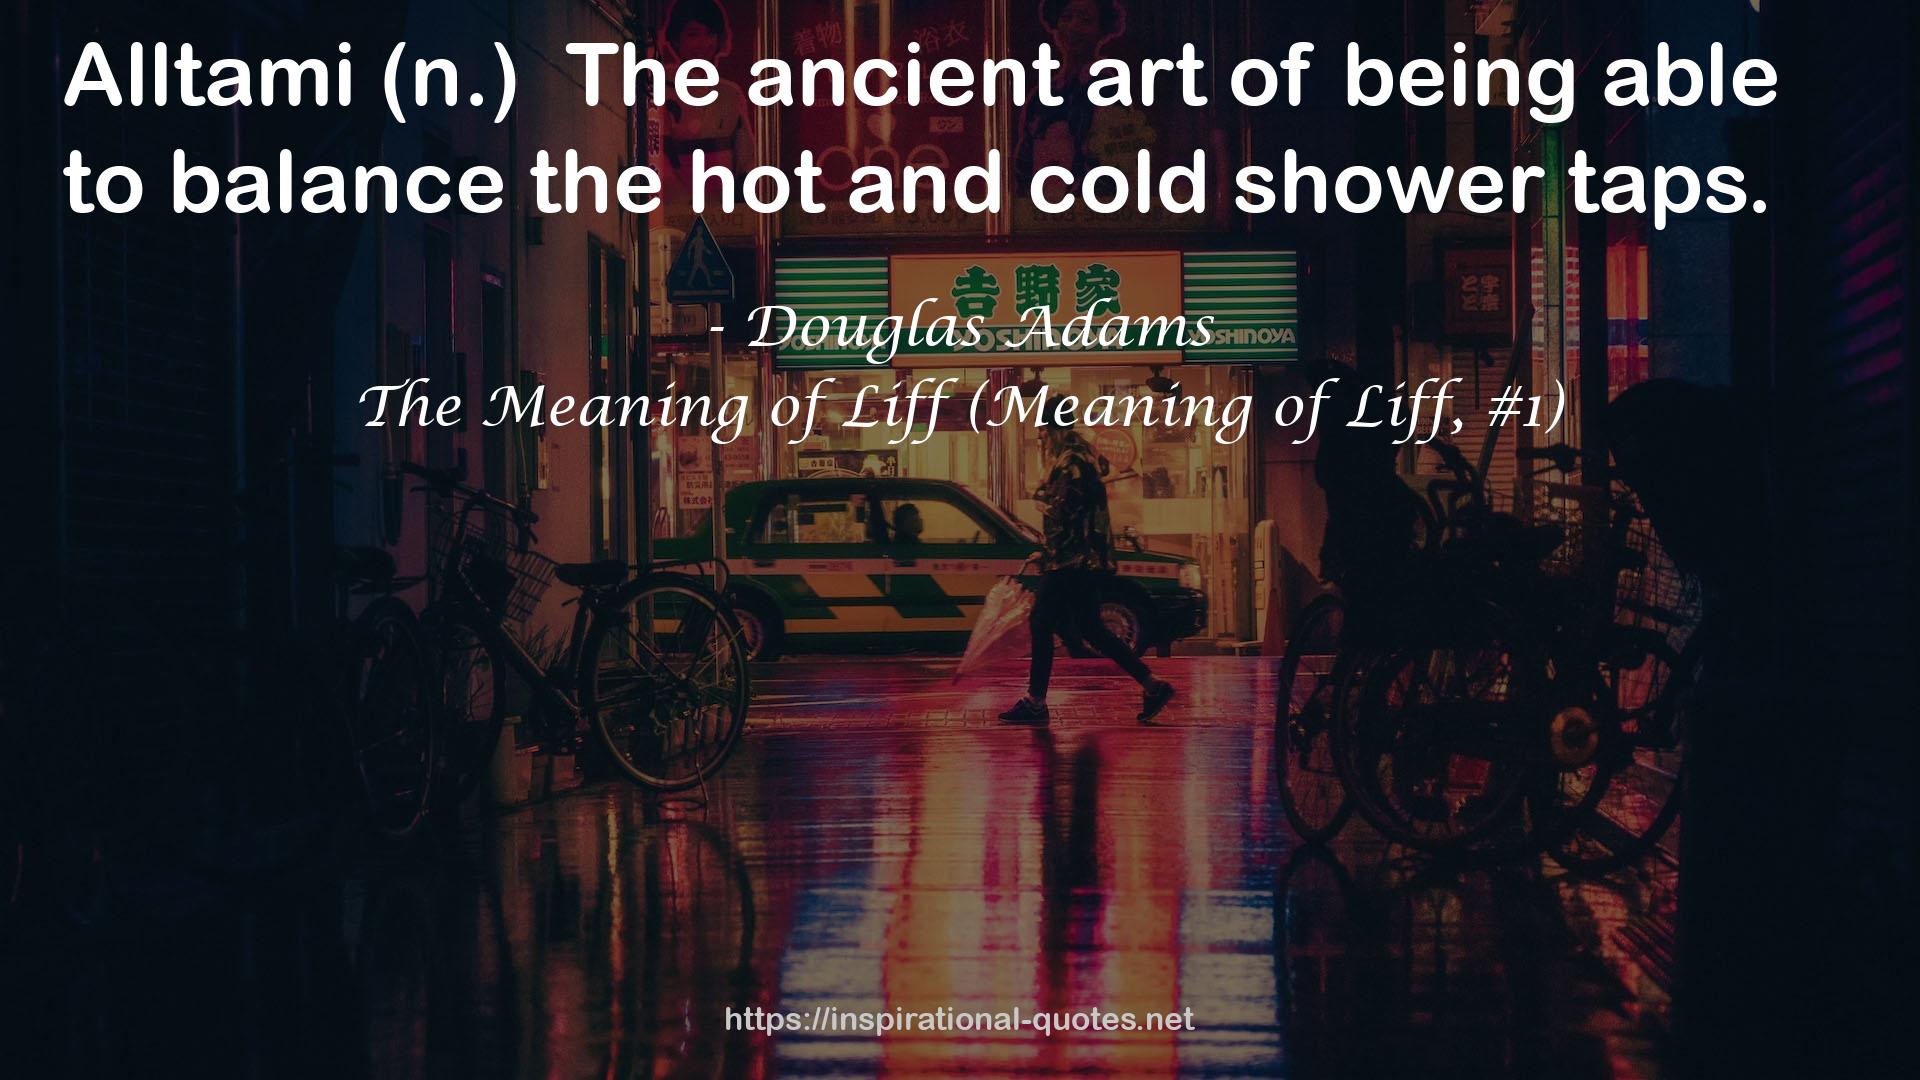 The Meaning of Liff (Meaning of Liff, #1) QUOTES